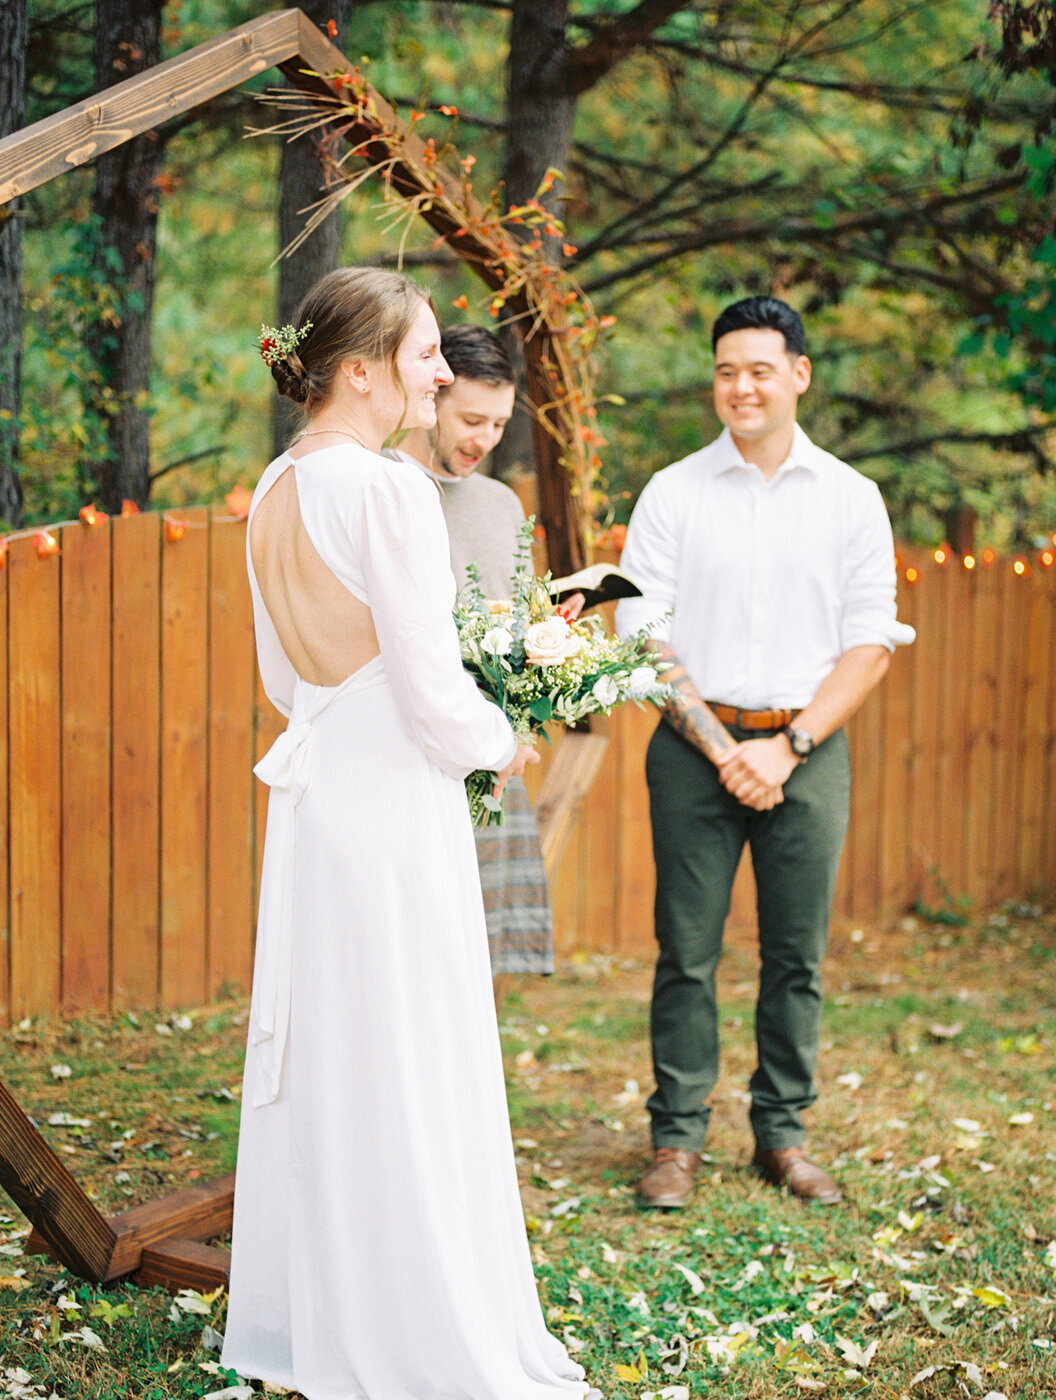 Raleigh Event Elopement Photographer | Jessica Agee Photography - 013